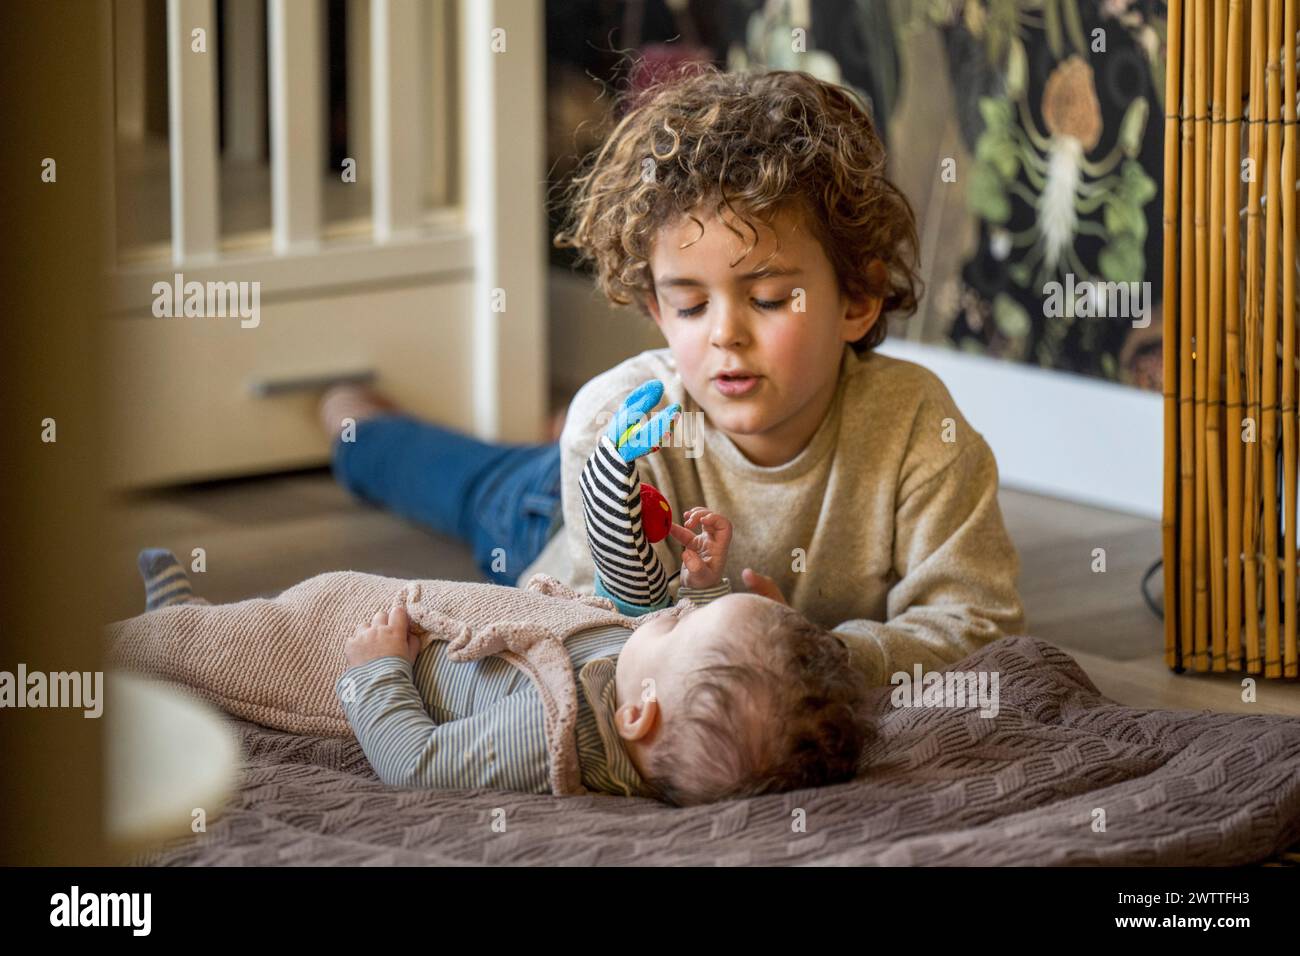 Older sibling engaging in gentle play with a baby on a cozy afternoon. Stock Photo